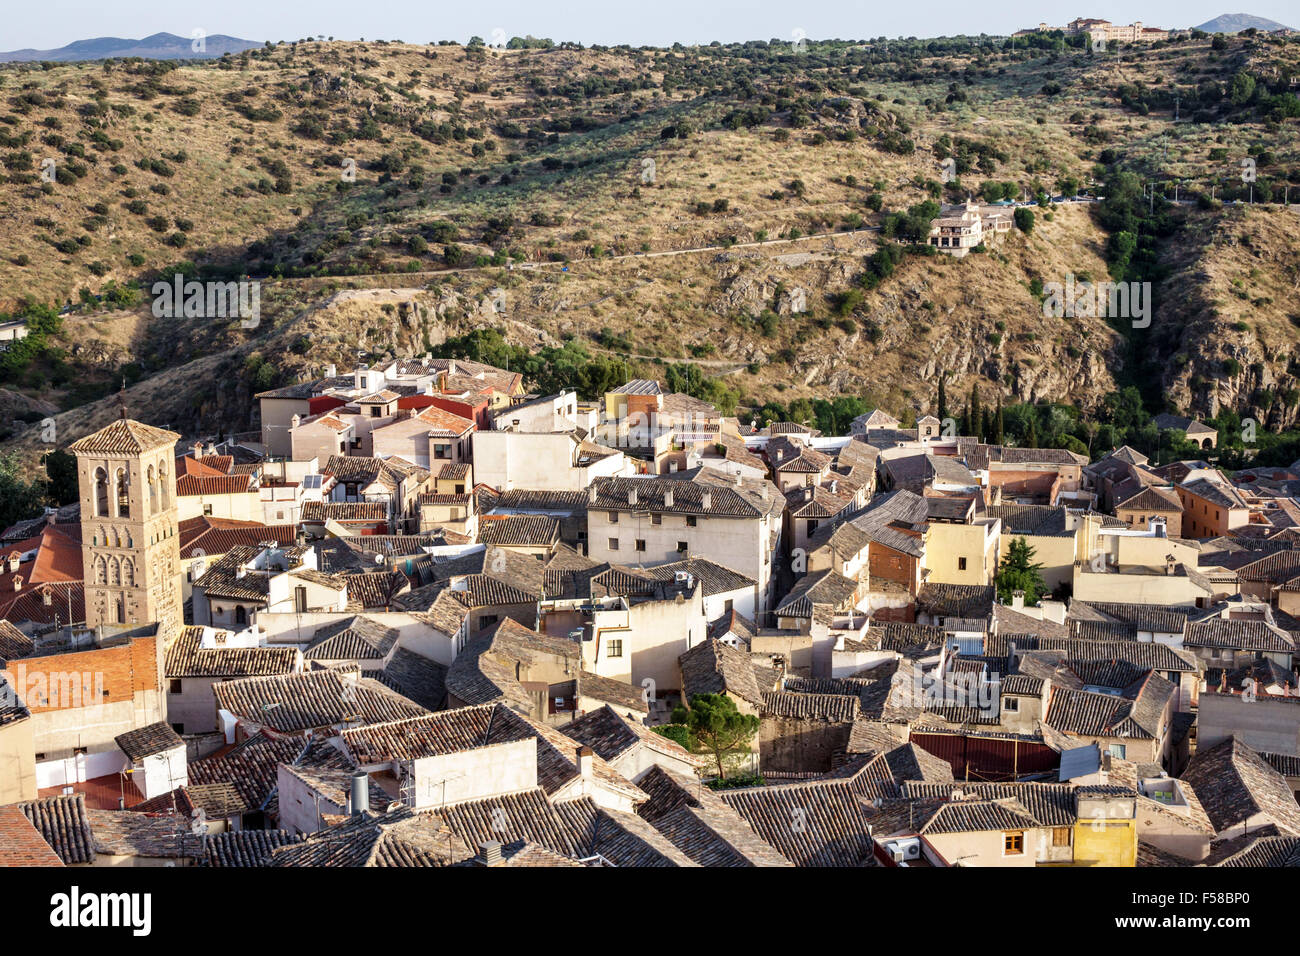 Toledo Spain,Europe,Spanish,Hispanic World Heritage Site,historic center,skyline,panoramic view,red clay barrel tiles,bell tower,buildings,rooftops,hi Stock Photo